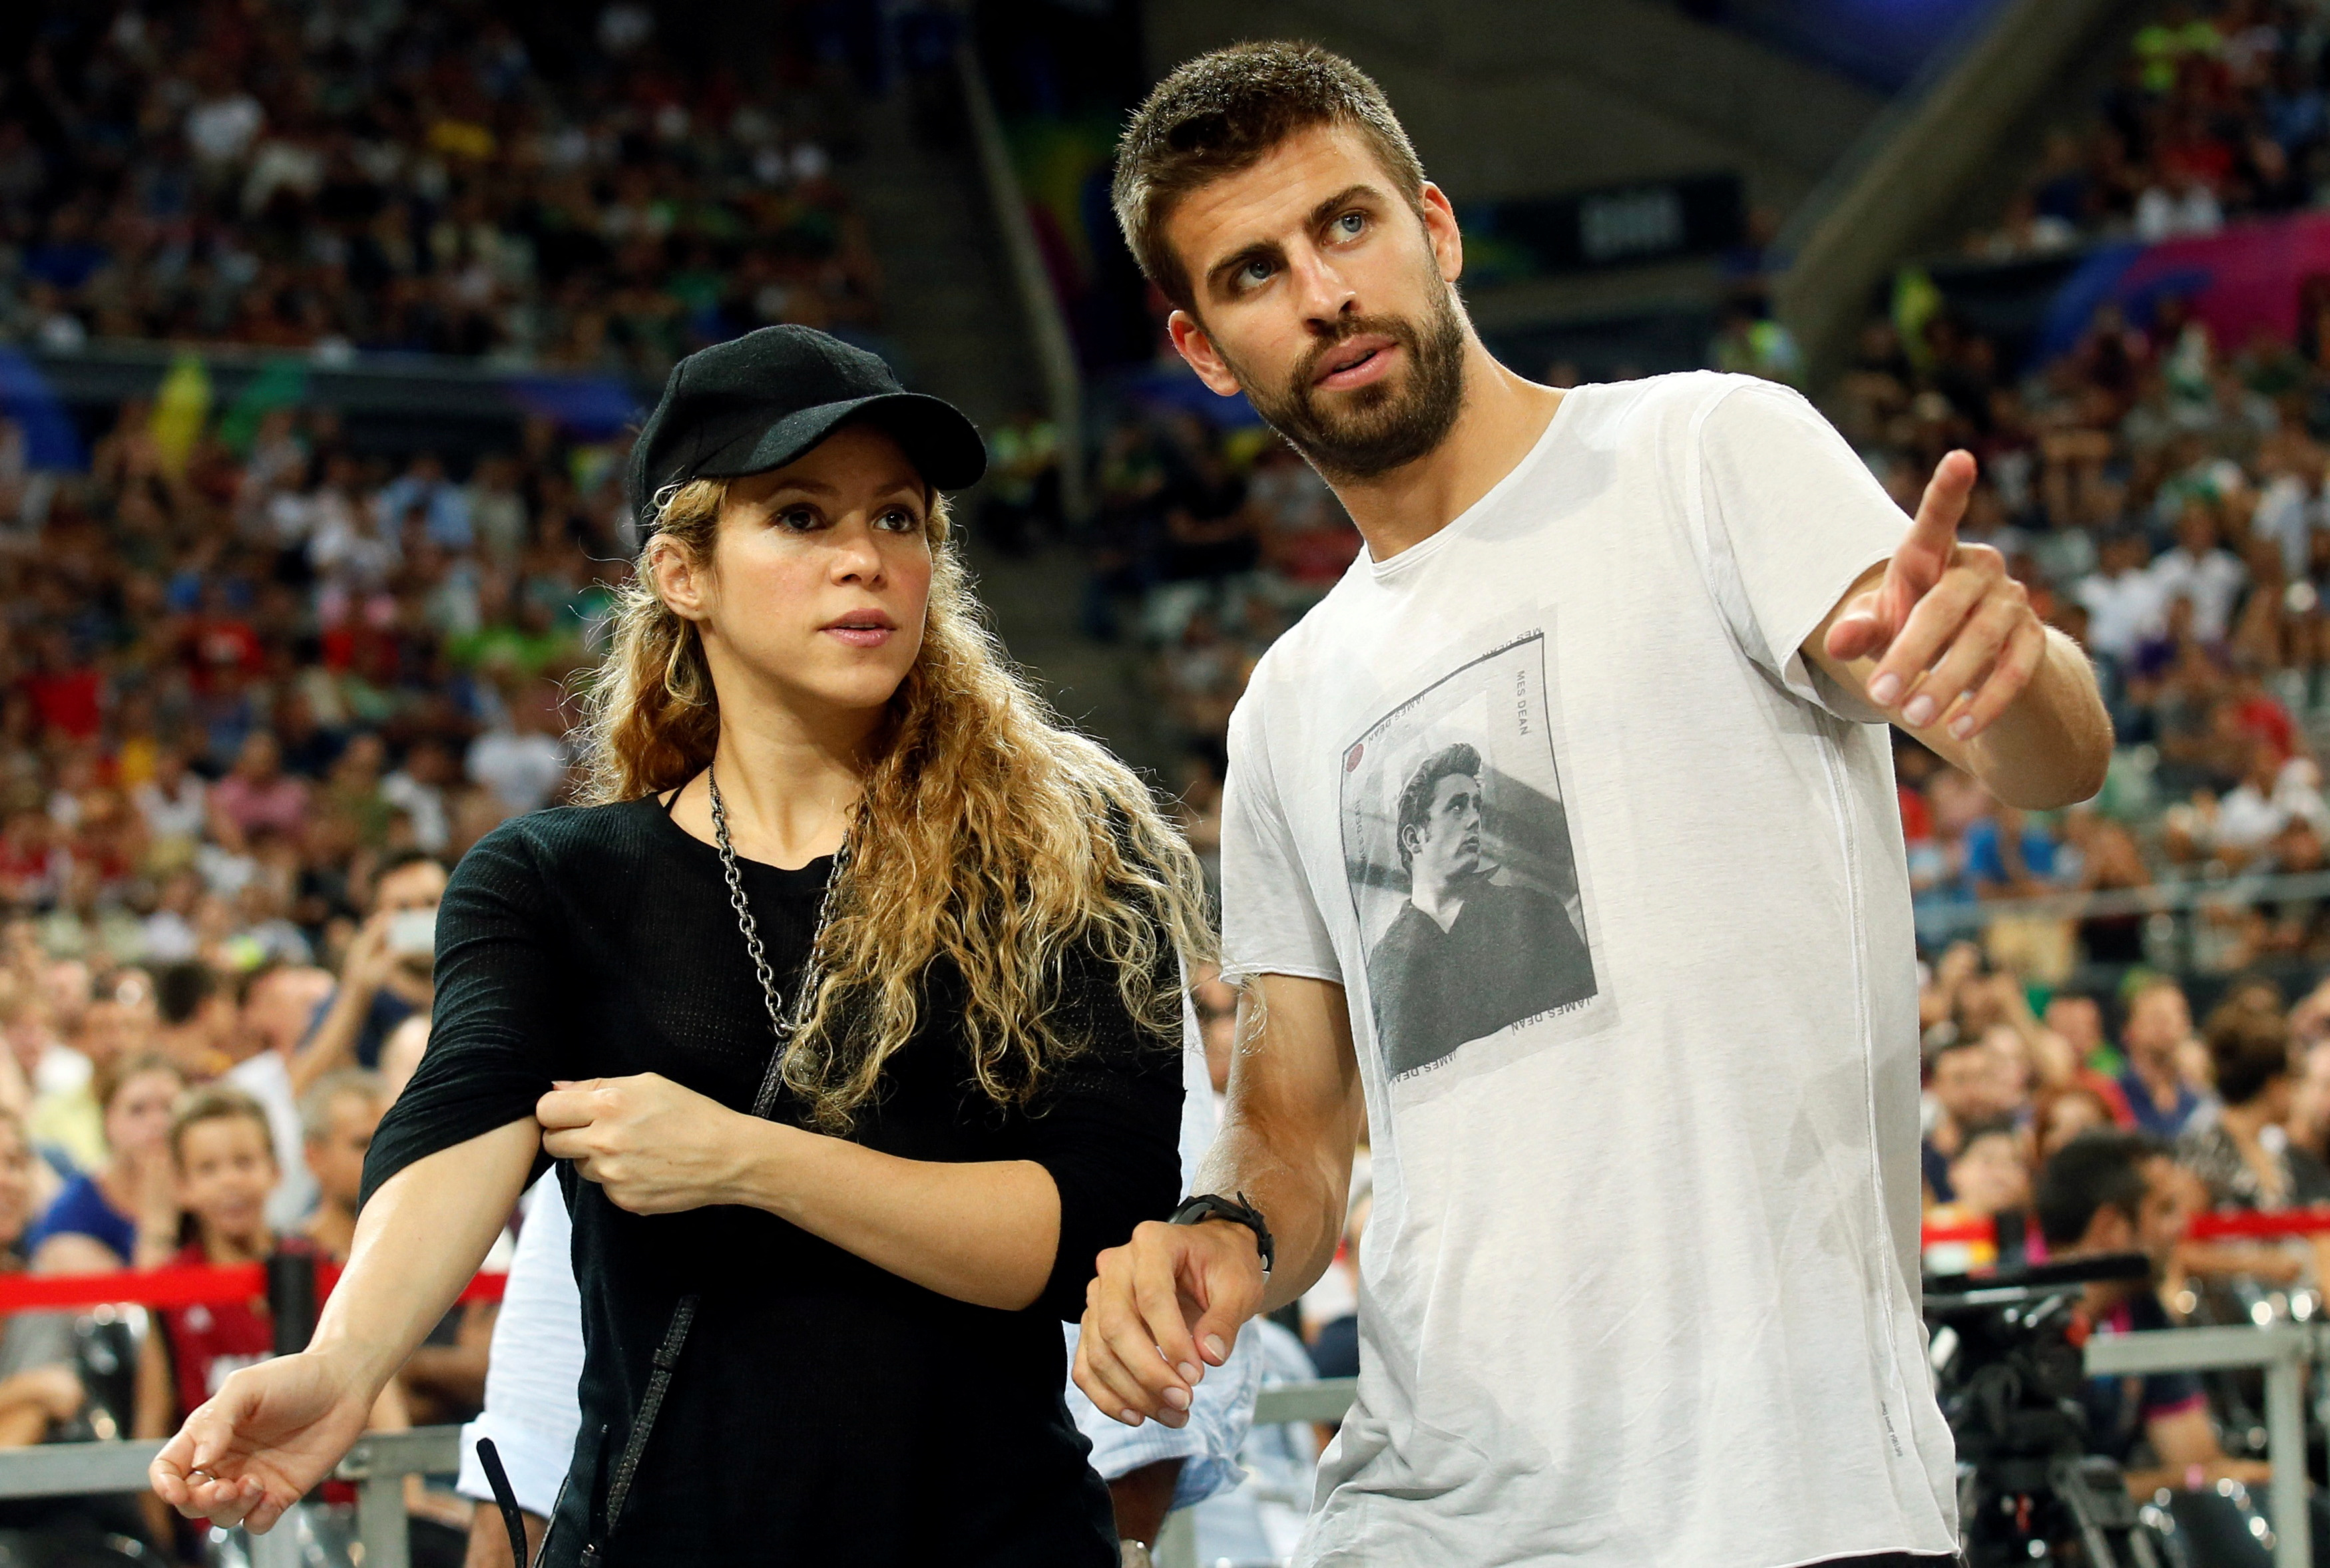 FILE PHOTO: Colombian singer Shakira (L) and her partner, Barcelona soccer player Gerard Pique, attend the Basketball World Cup quarter-final game between the U.S. and Slovenia in Barcelona September 9, 2014.   REUTERS/Albert Gea/File Photo